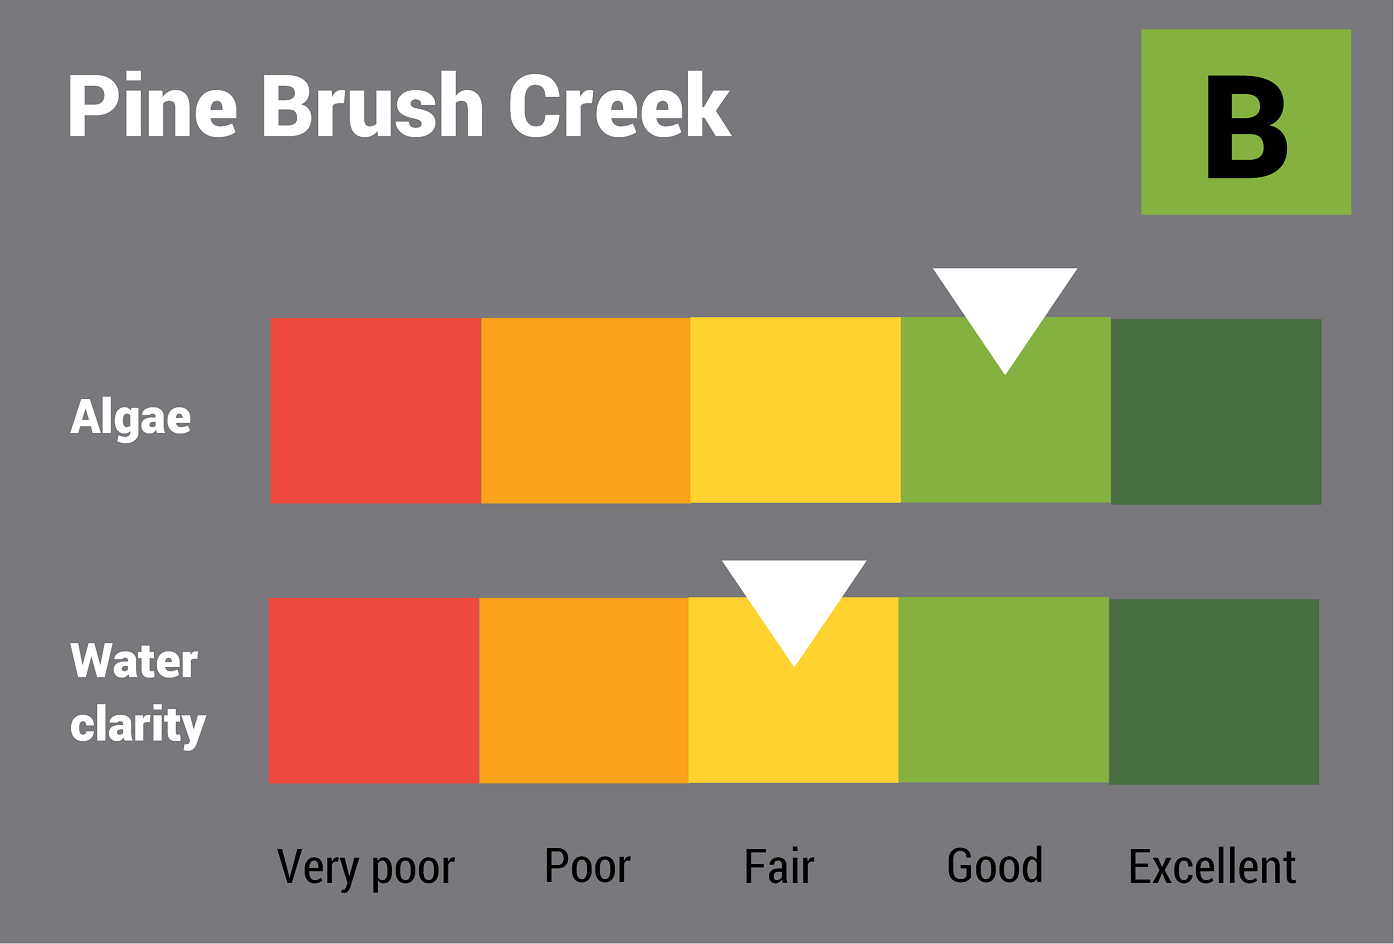 Pine Brush Creek water quality report card for algae and water clarity showing colour-coded ratings (red, orange, yellow, light green and dark green, which represent very poor, poor, fair, good and excellent, respectively). Algae is rated 'good' and water clarity is rated 'fair' giving an overall rating of 'good' or 'B'.